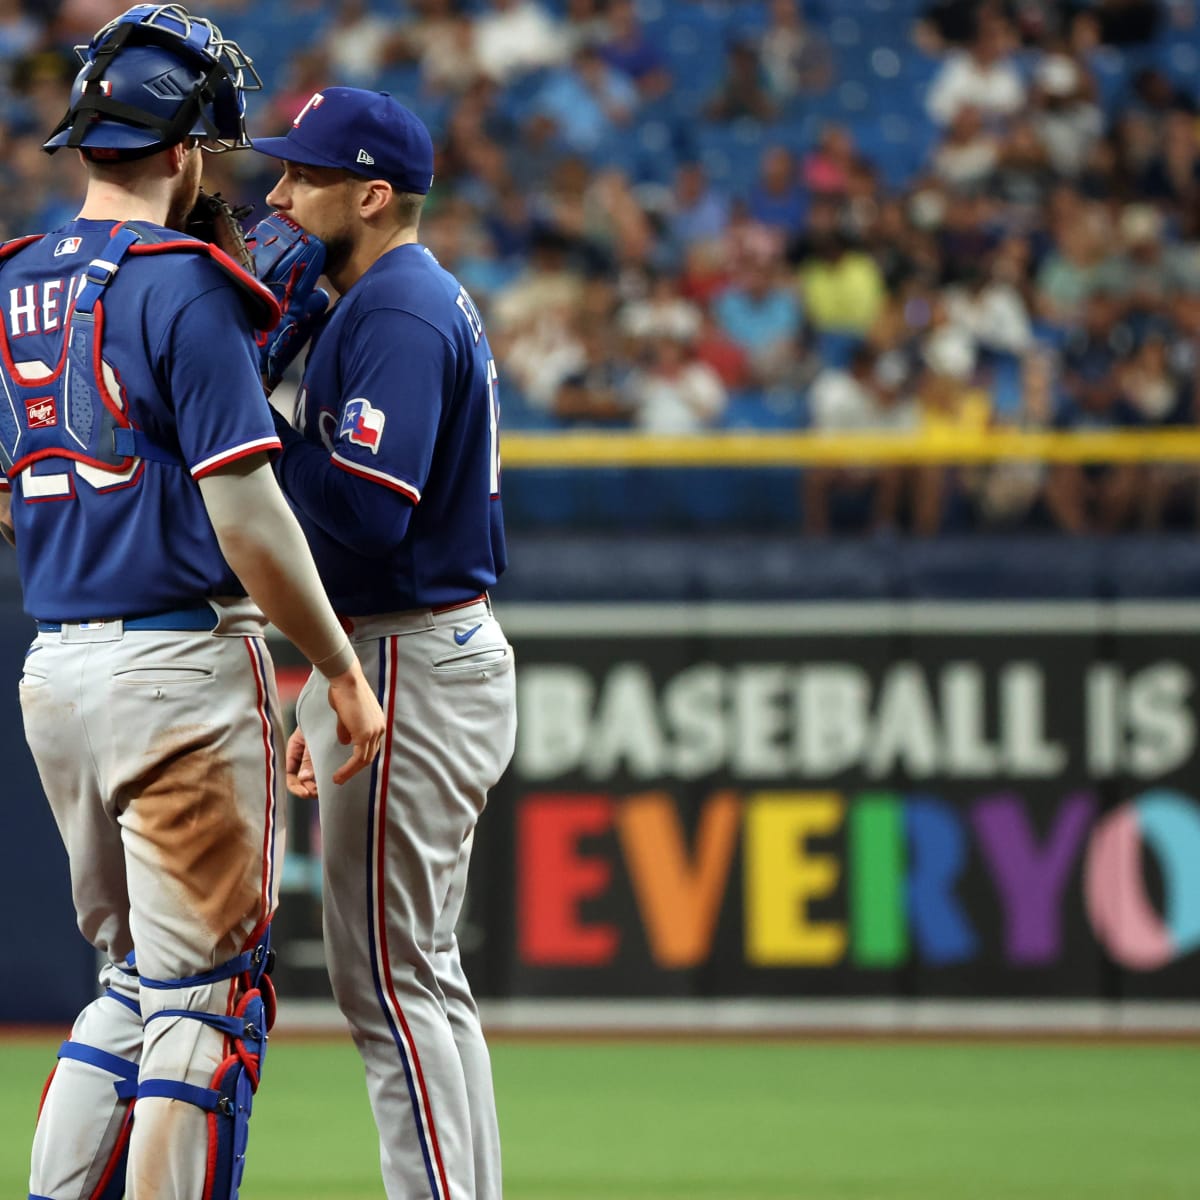 Texas Rangers are lone MLB team to ignore Pride Month - Axios Dallas